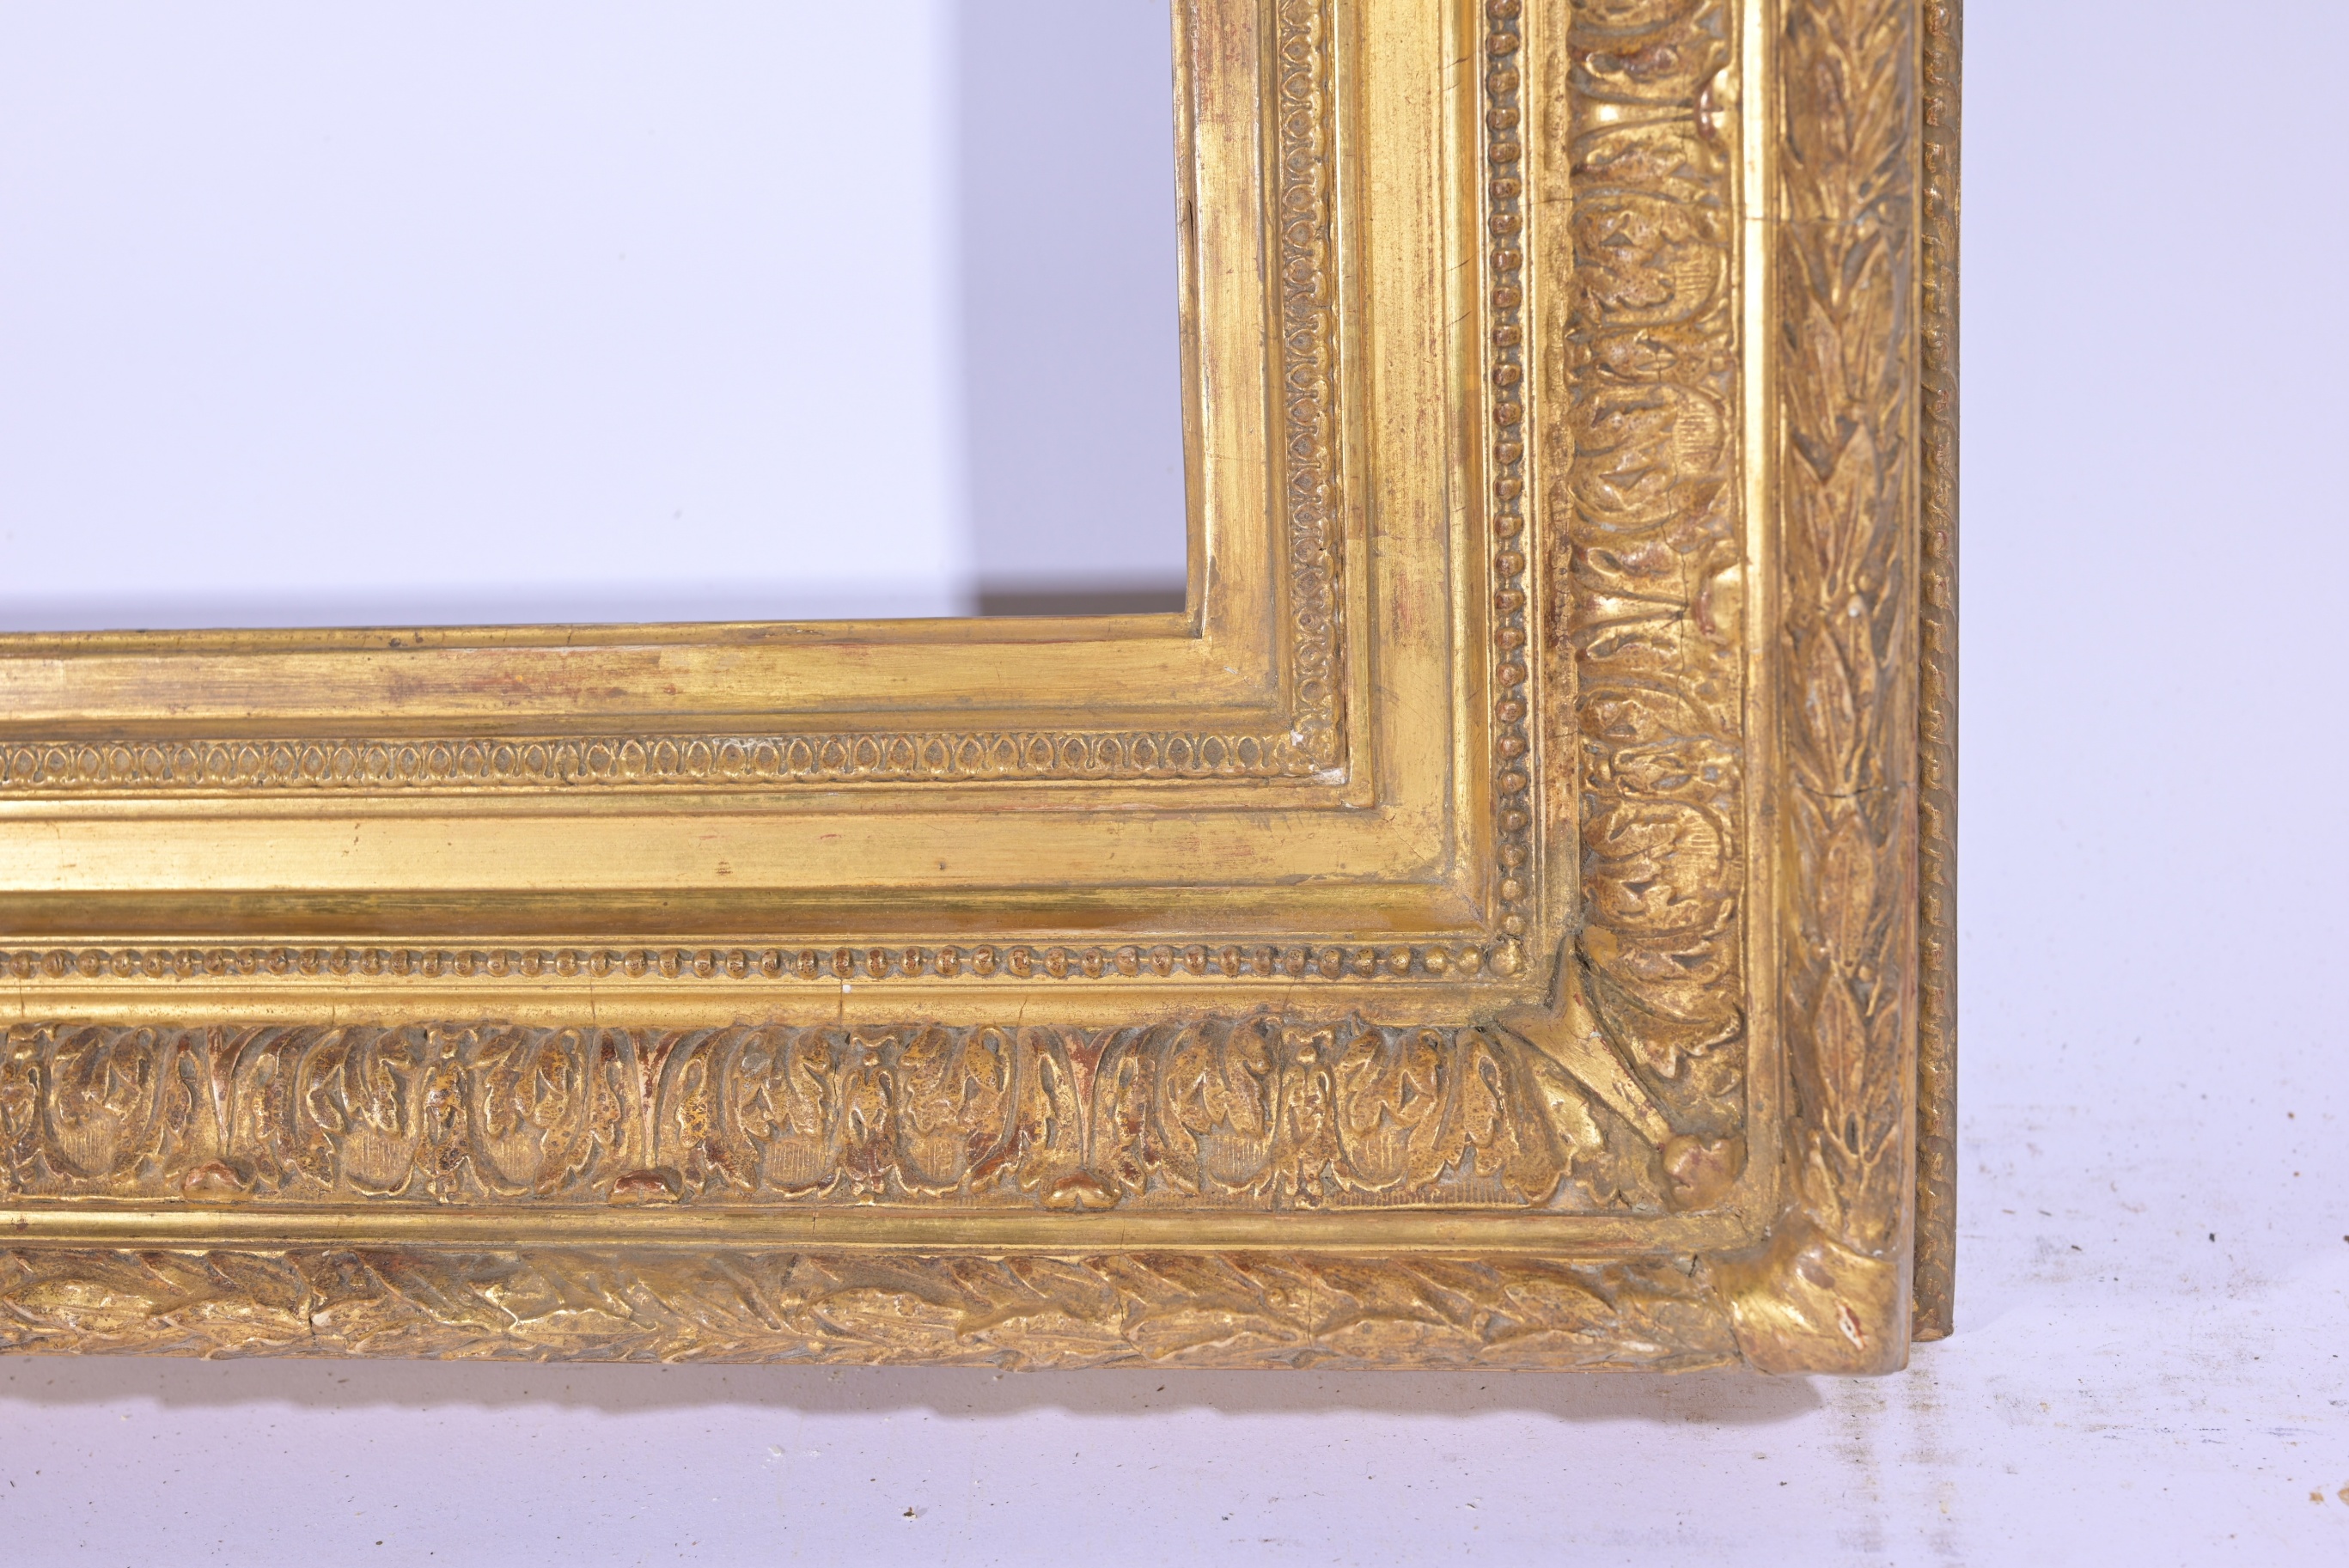 French,19th century Gilt Wood Frame - 28 x 18 - Image 5 of 9